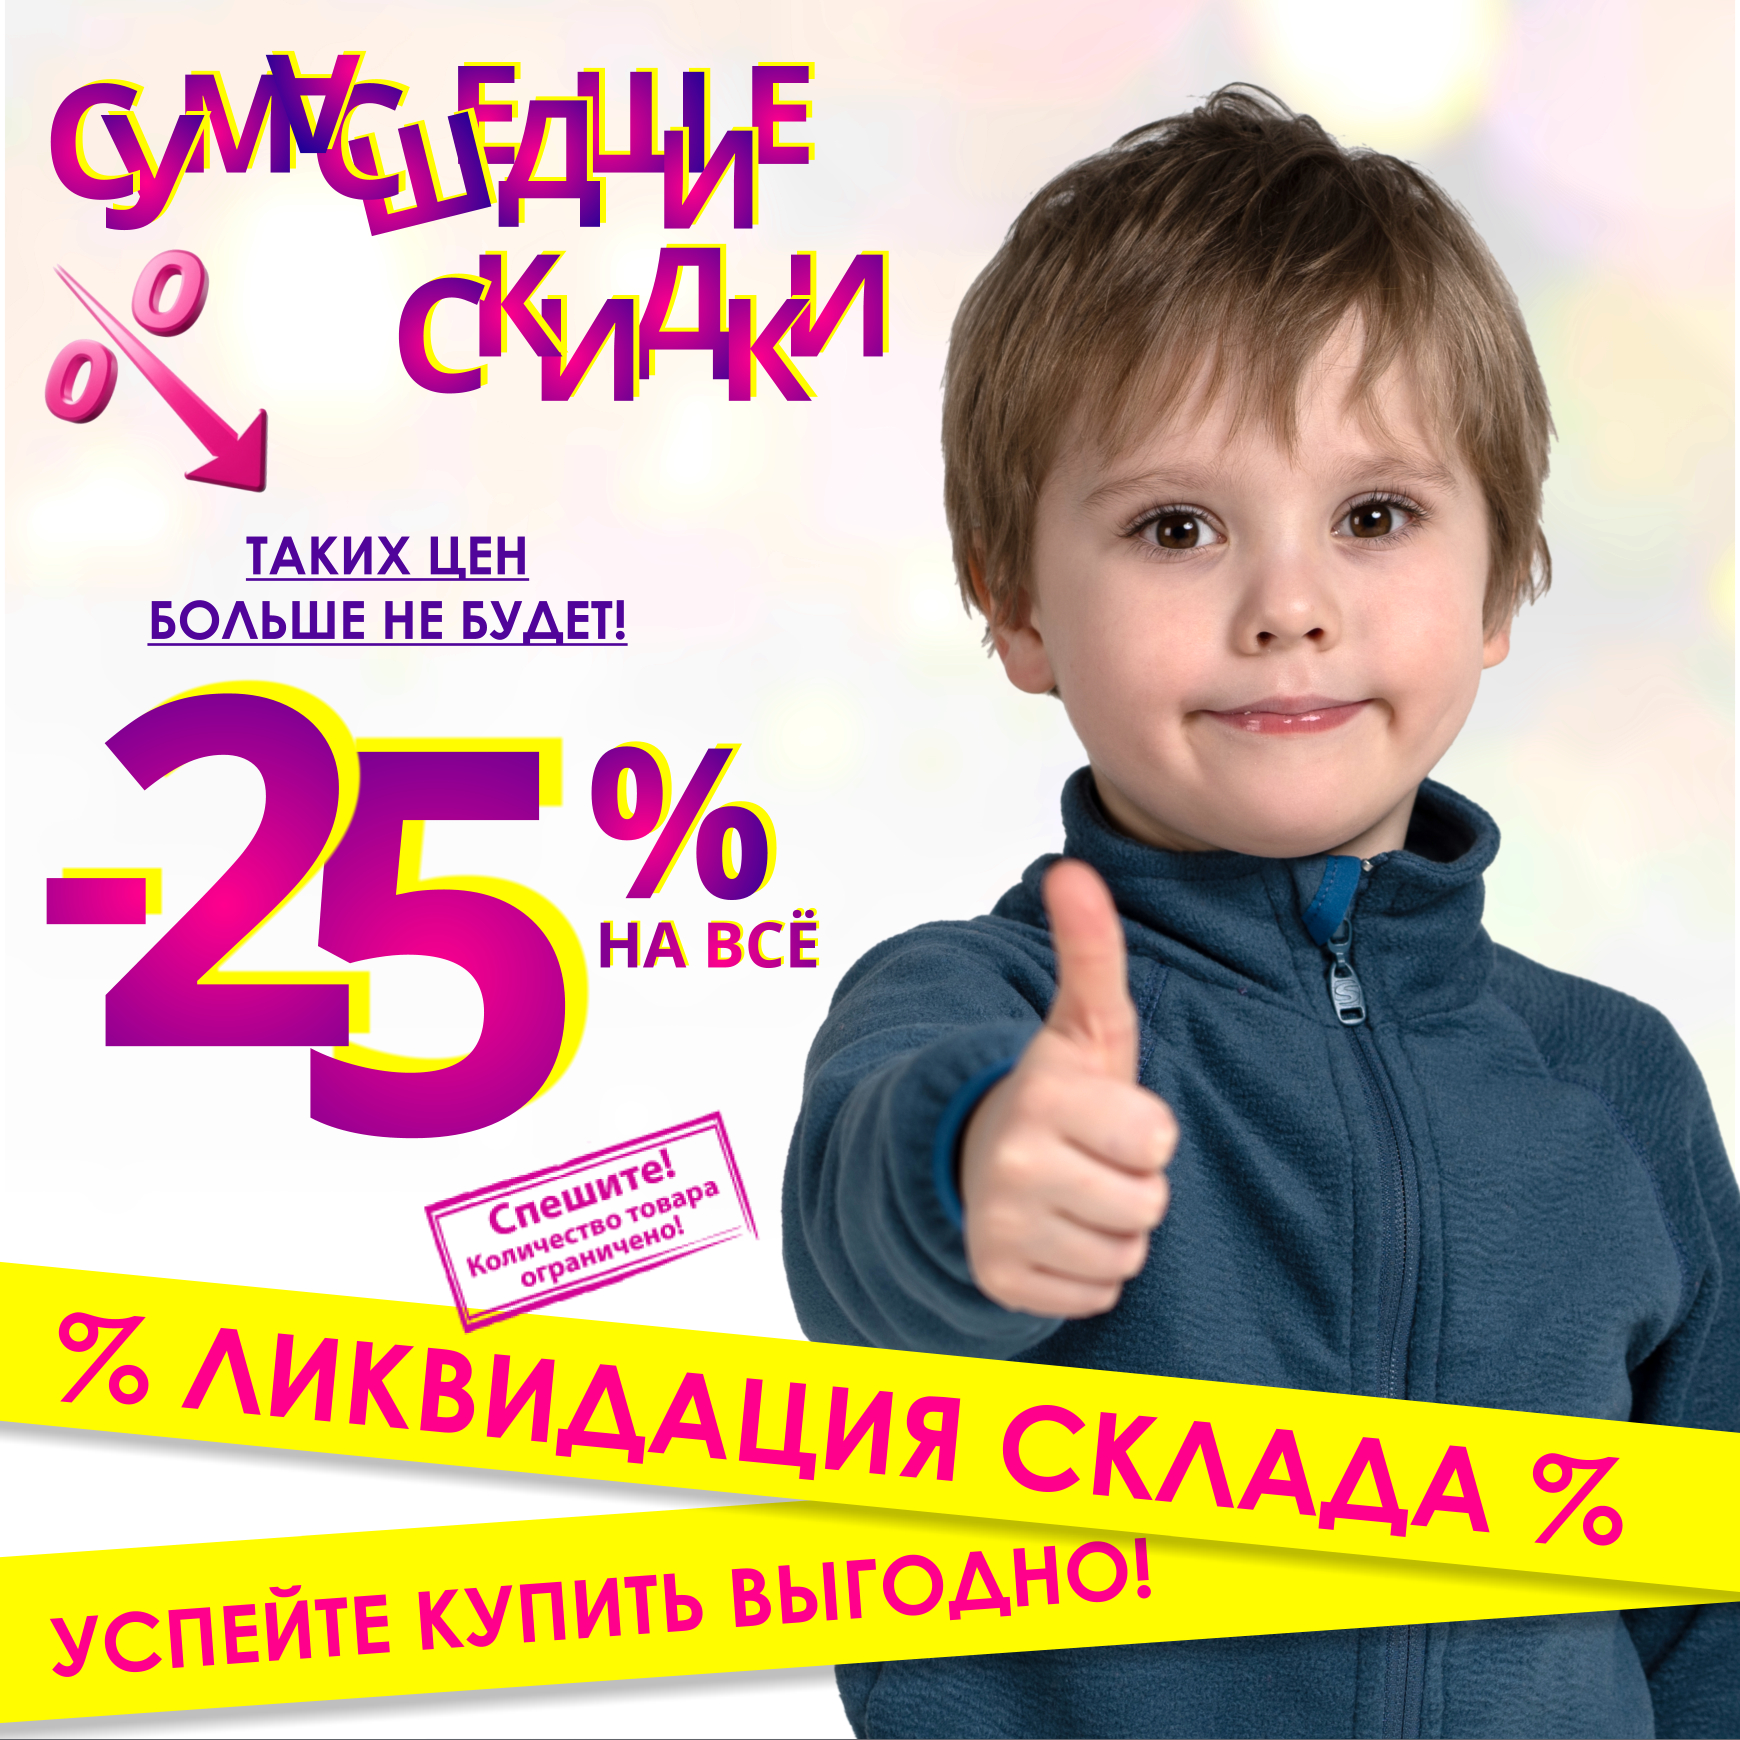   30.09. Smail-36.  !     25%  ӣ!!!   !   Softshell,   ! , , , , !  !